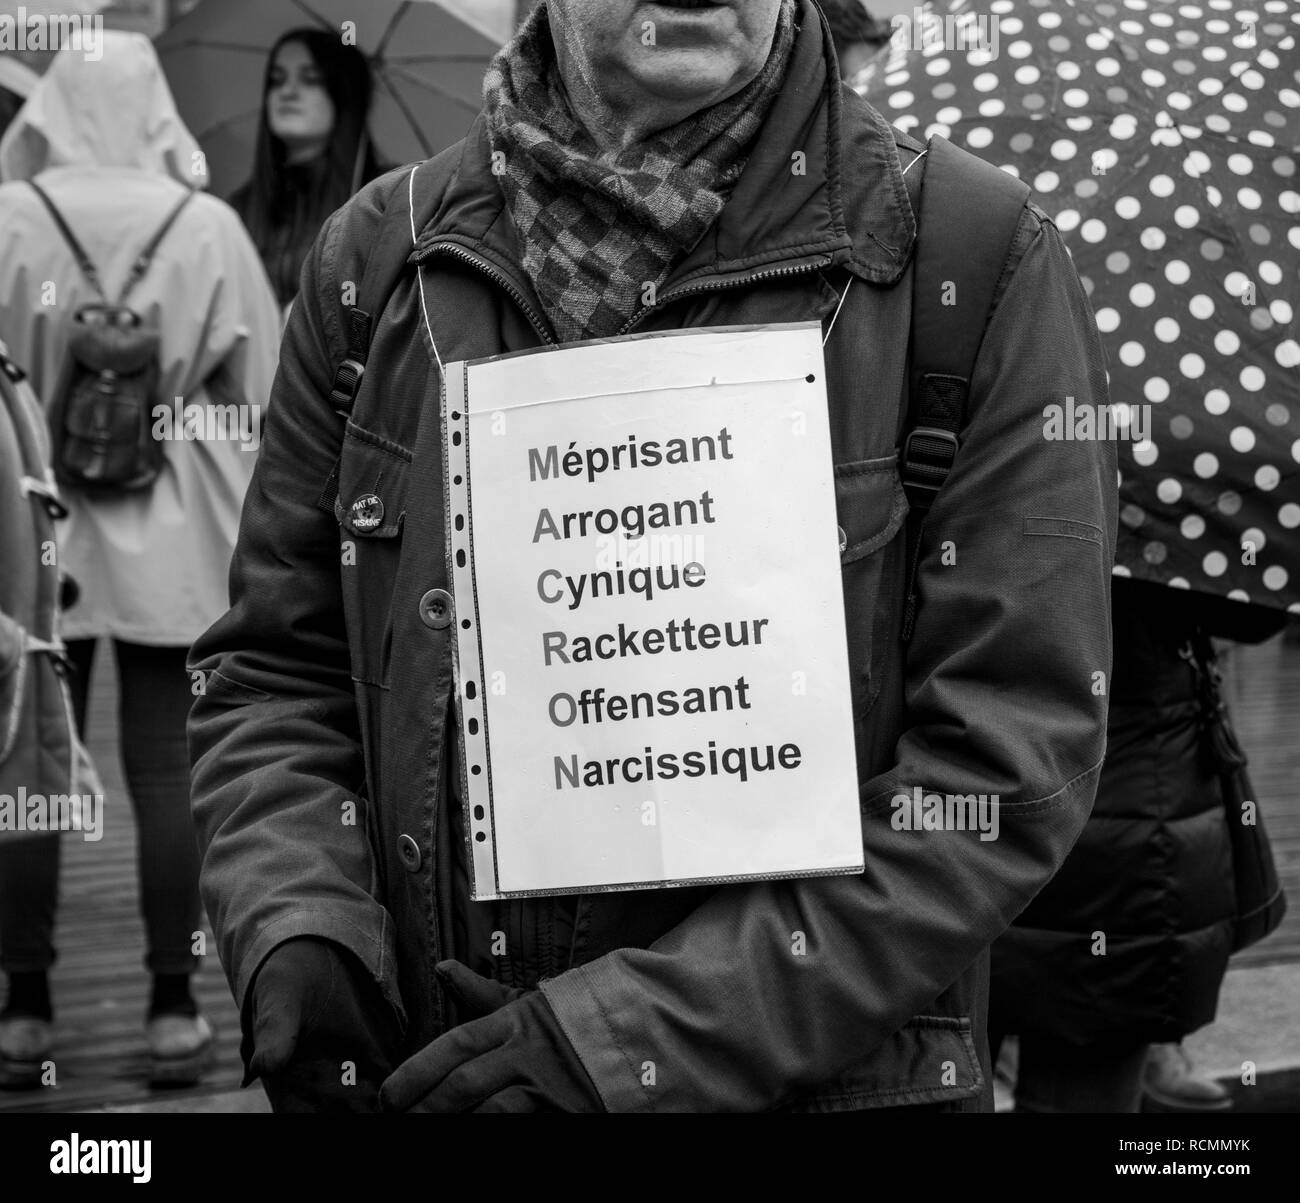 STRASBOURG, FRANCE  - MAR 22, 2018: Man wearing MACRON negative acronyme at demonstration protest against Macron French government string of reforms - black and white  Stock Photo